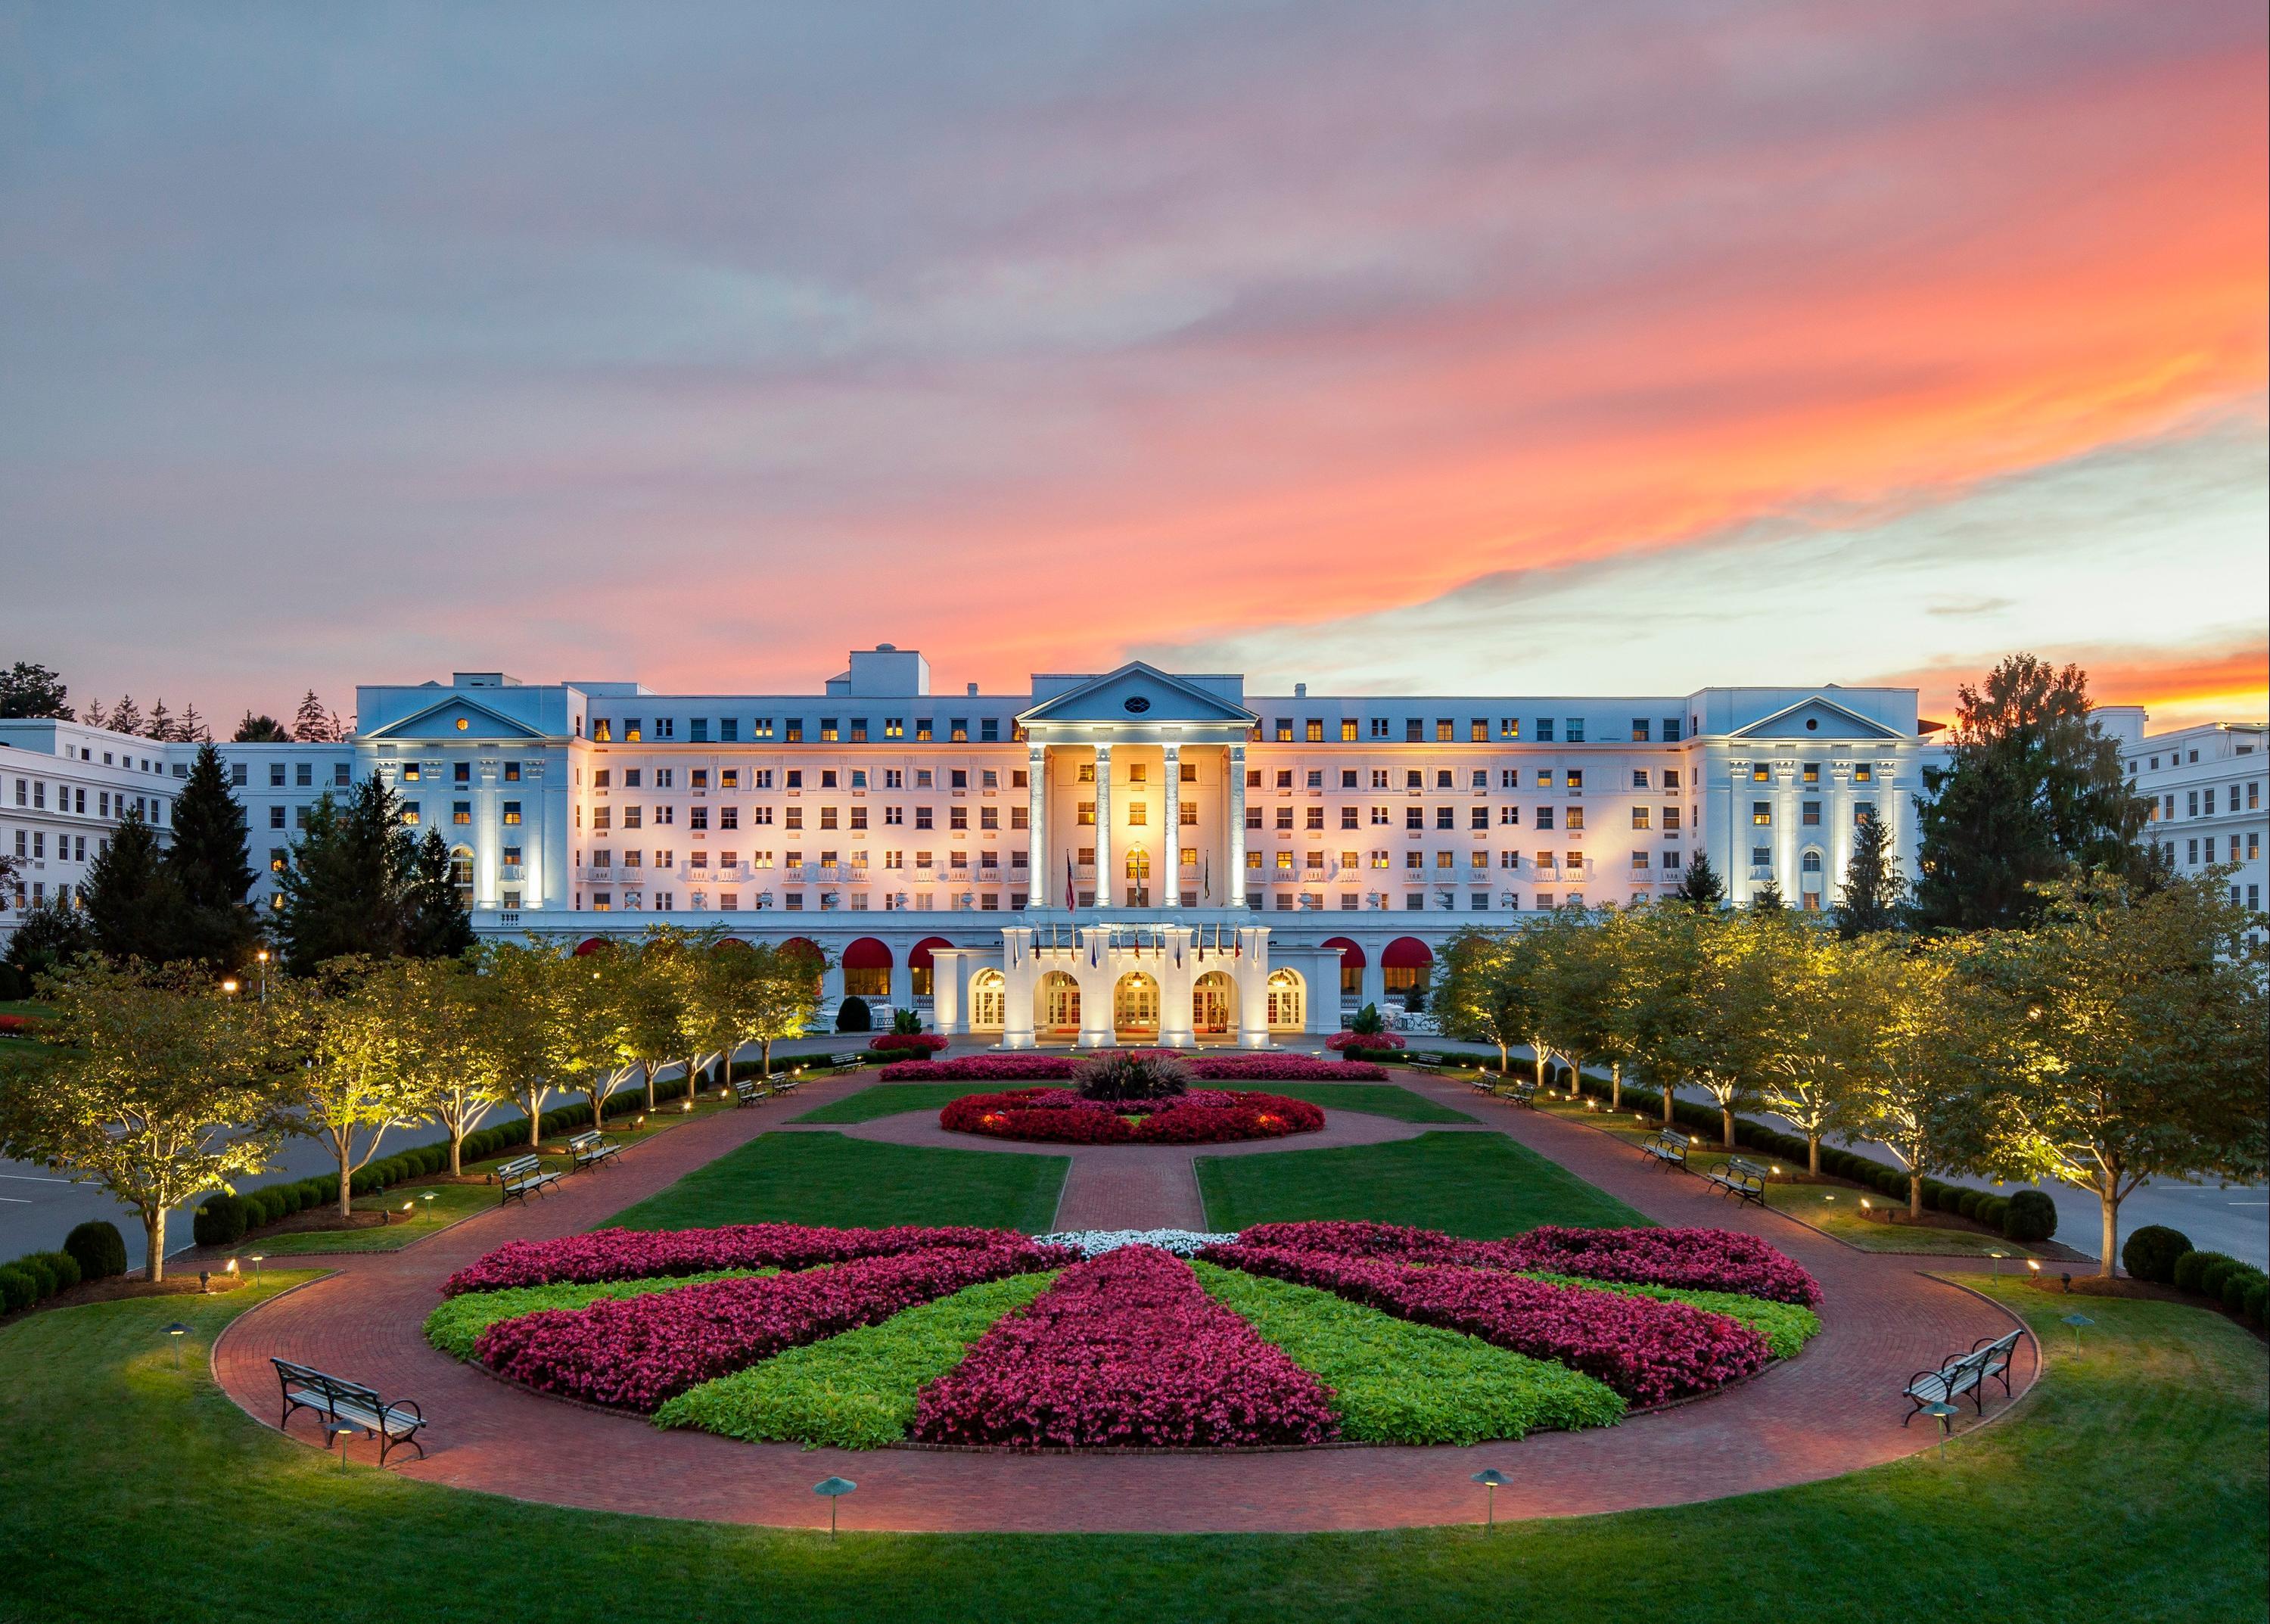 Building view of The Greenbrier Hotel